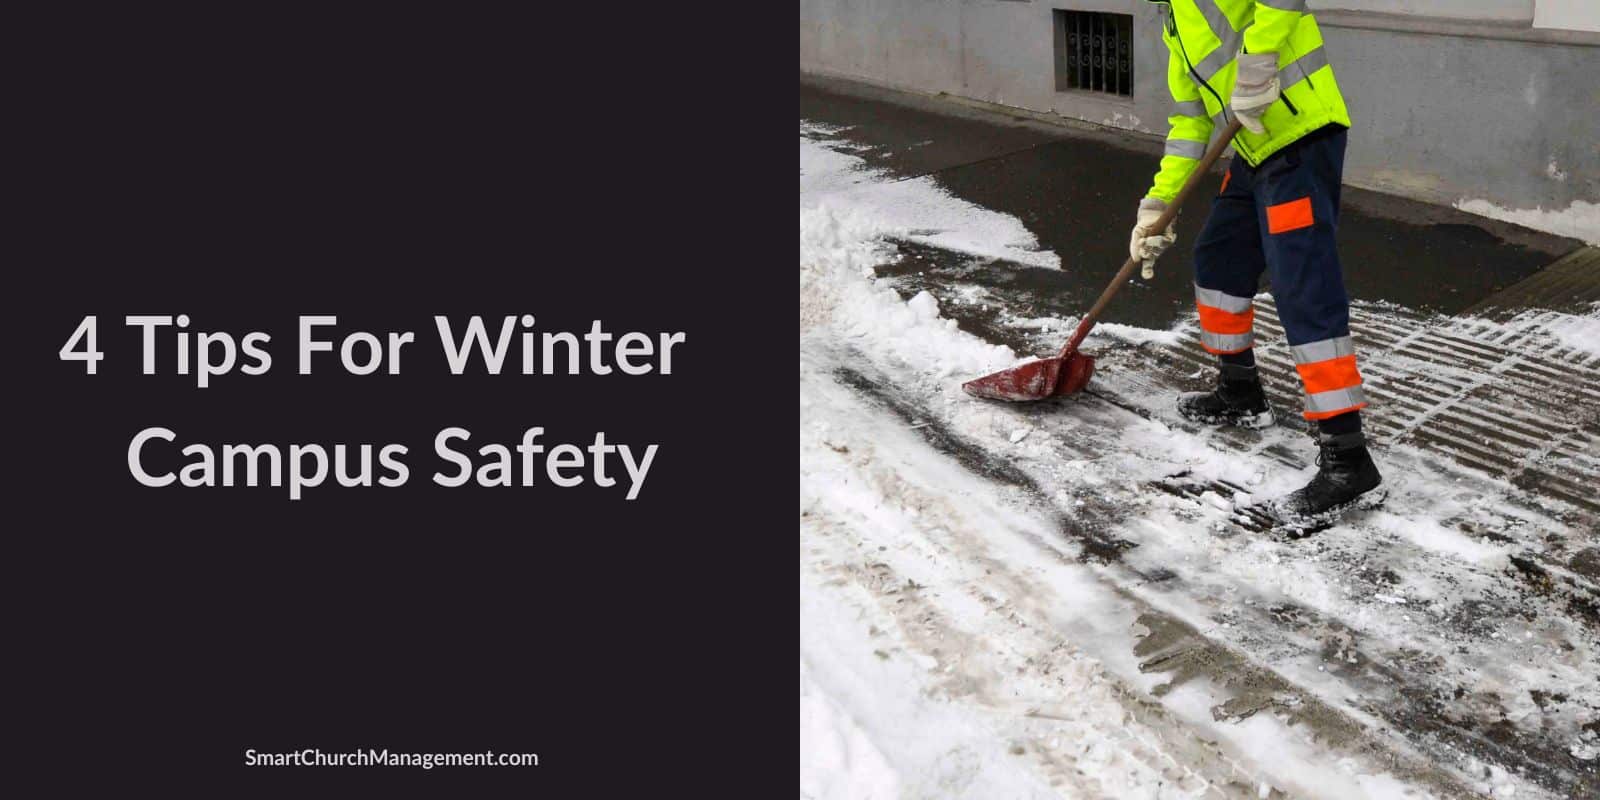 Winter campus safety tips